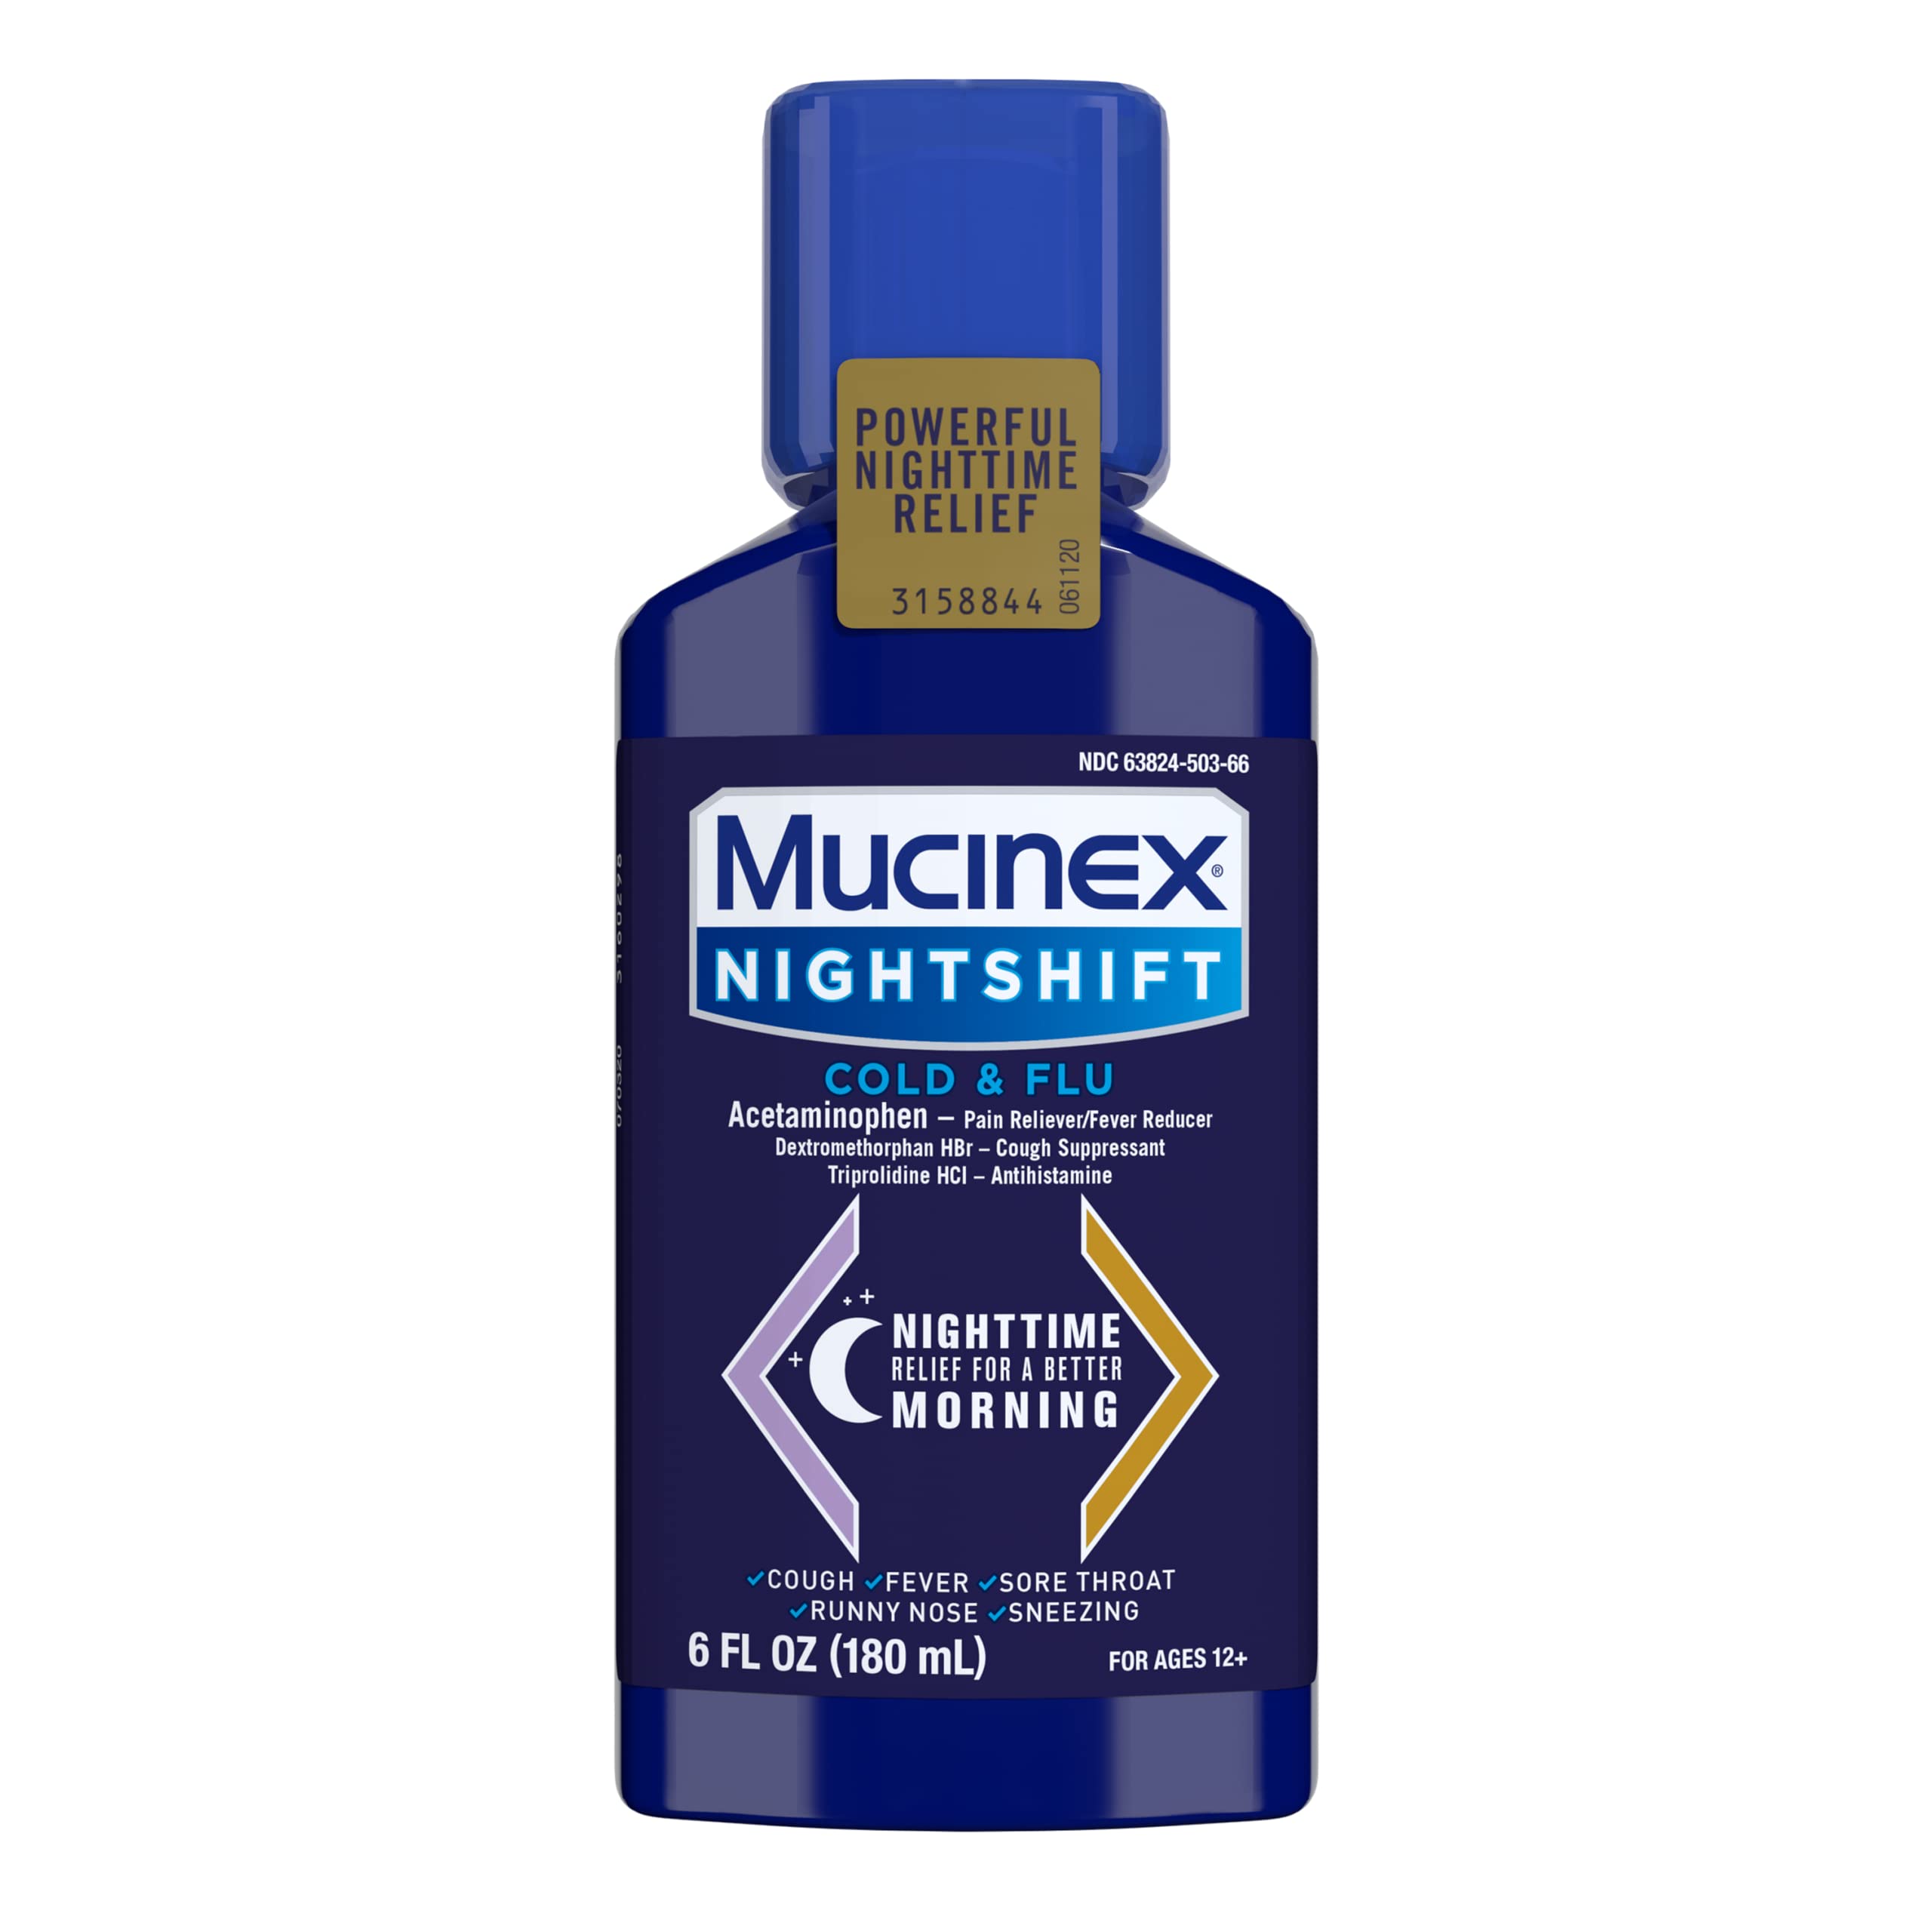 Mucinex Nightshift Cold & Flu Liquid That Relieves Fever/Sneezing/Sore Throat/Runny Nose and Cough, 6 Fl Oz (Pack of 1)